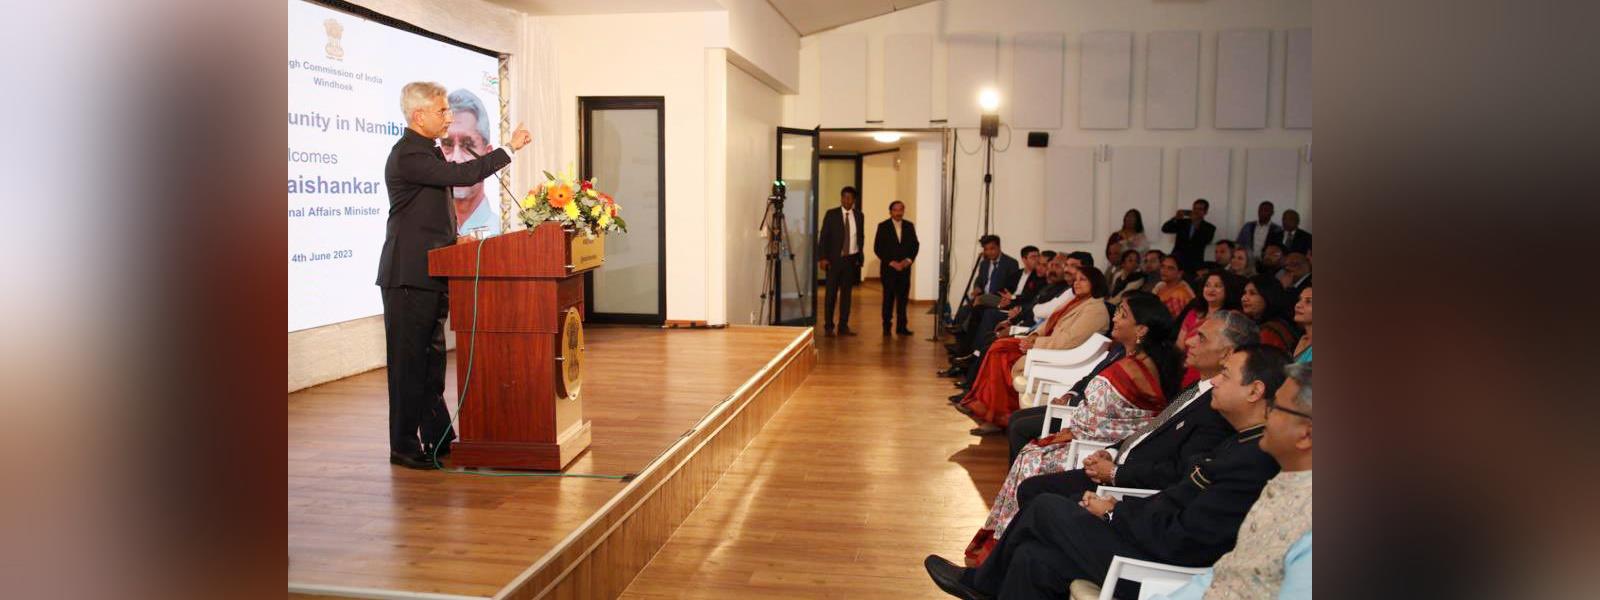 External Affairs Minister Dr. S. Jaishankar interacted with the Indian community in Windhoek, Namibia